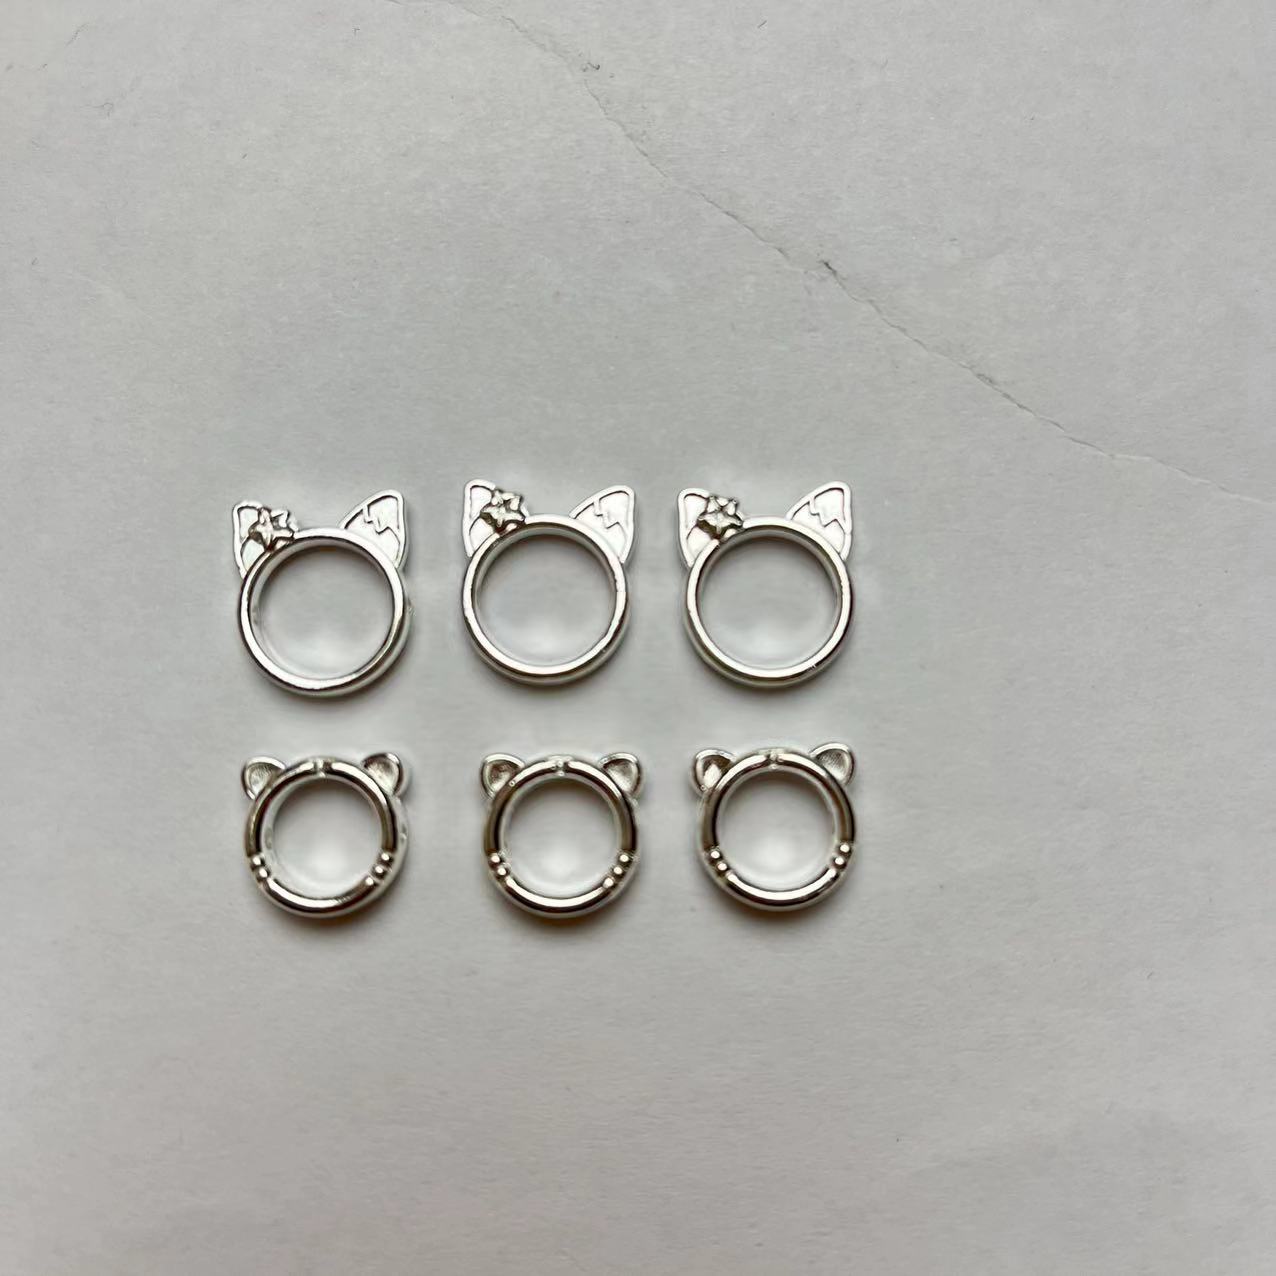 Silver Cute Bunny Beads Frame Charms Set for Jewelry Making DIY Crafts(2 items mix)